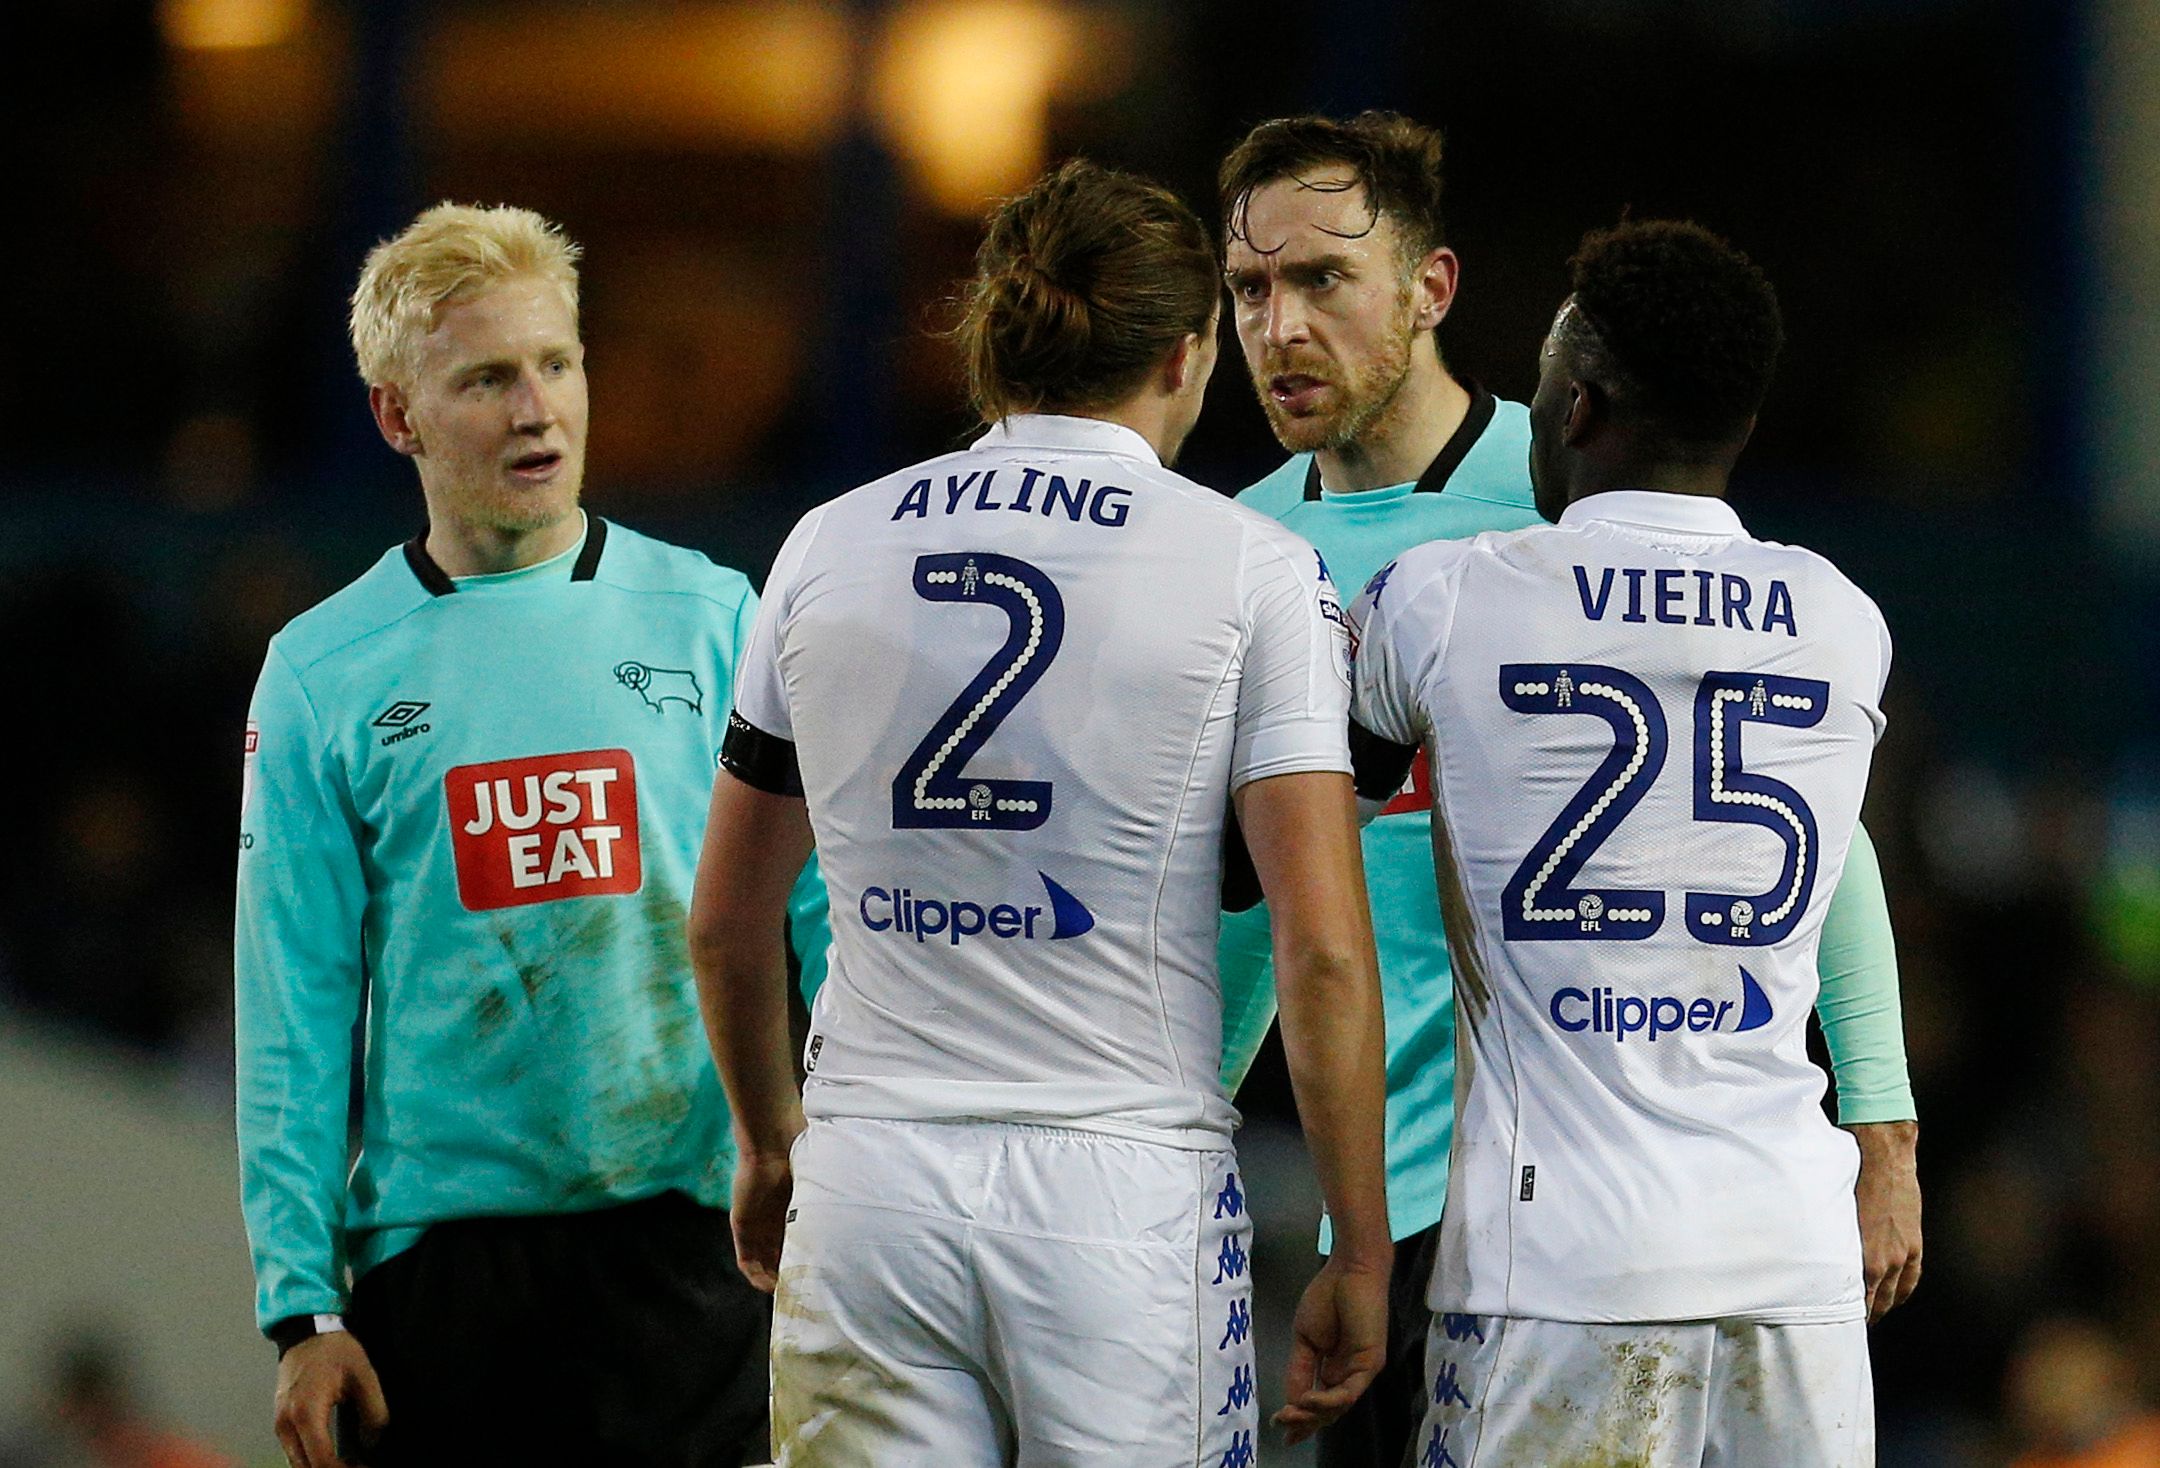 Britain Football Soccer - Leeds United v Derby County - Sky Bet Championship - Elland Road - 13/1/17 Leeds' Luke Ayling clashes with Derby's Richard Keogh as Will Hughes and Leeds' Ronaldo Vieira look on Mandatory Credit: Action Images / Craig Brough Livepic EDITORIAL USE ONLY. No use with unauthorized audio, video, data, fixture lists, club/league logos or 